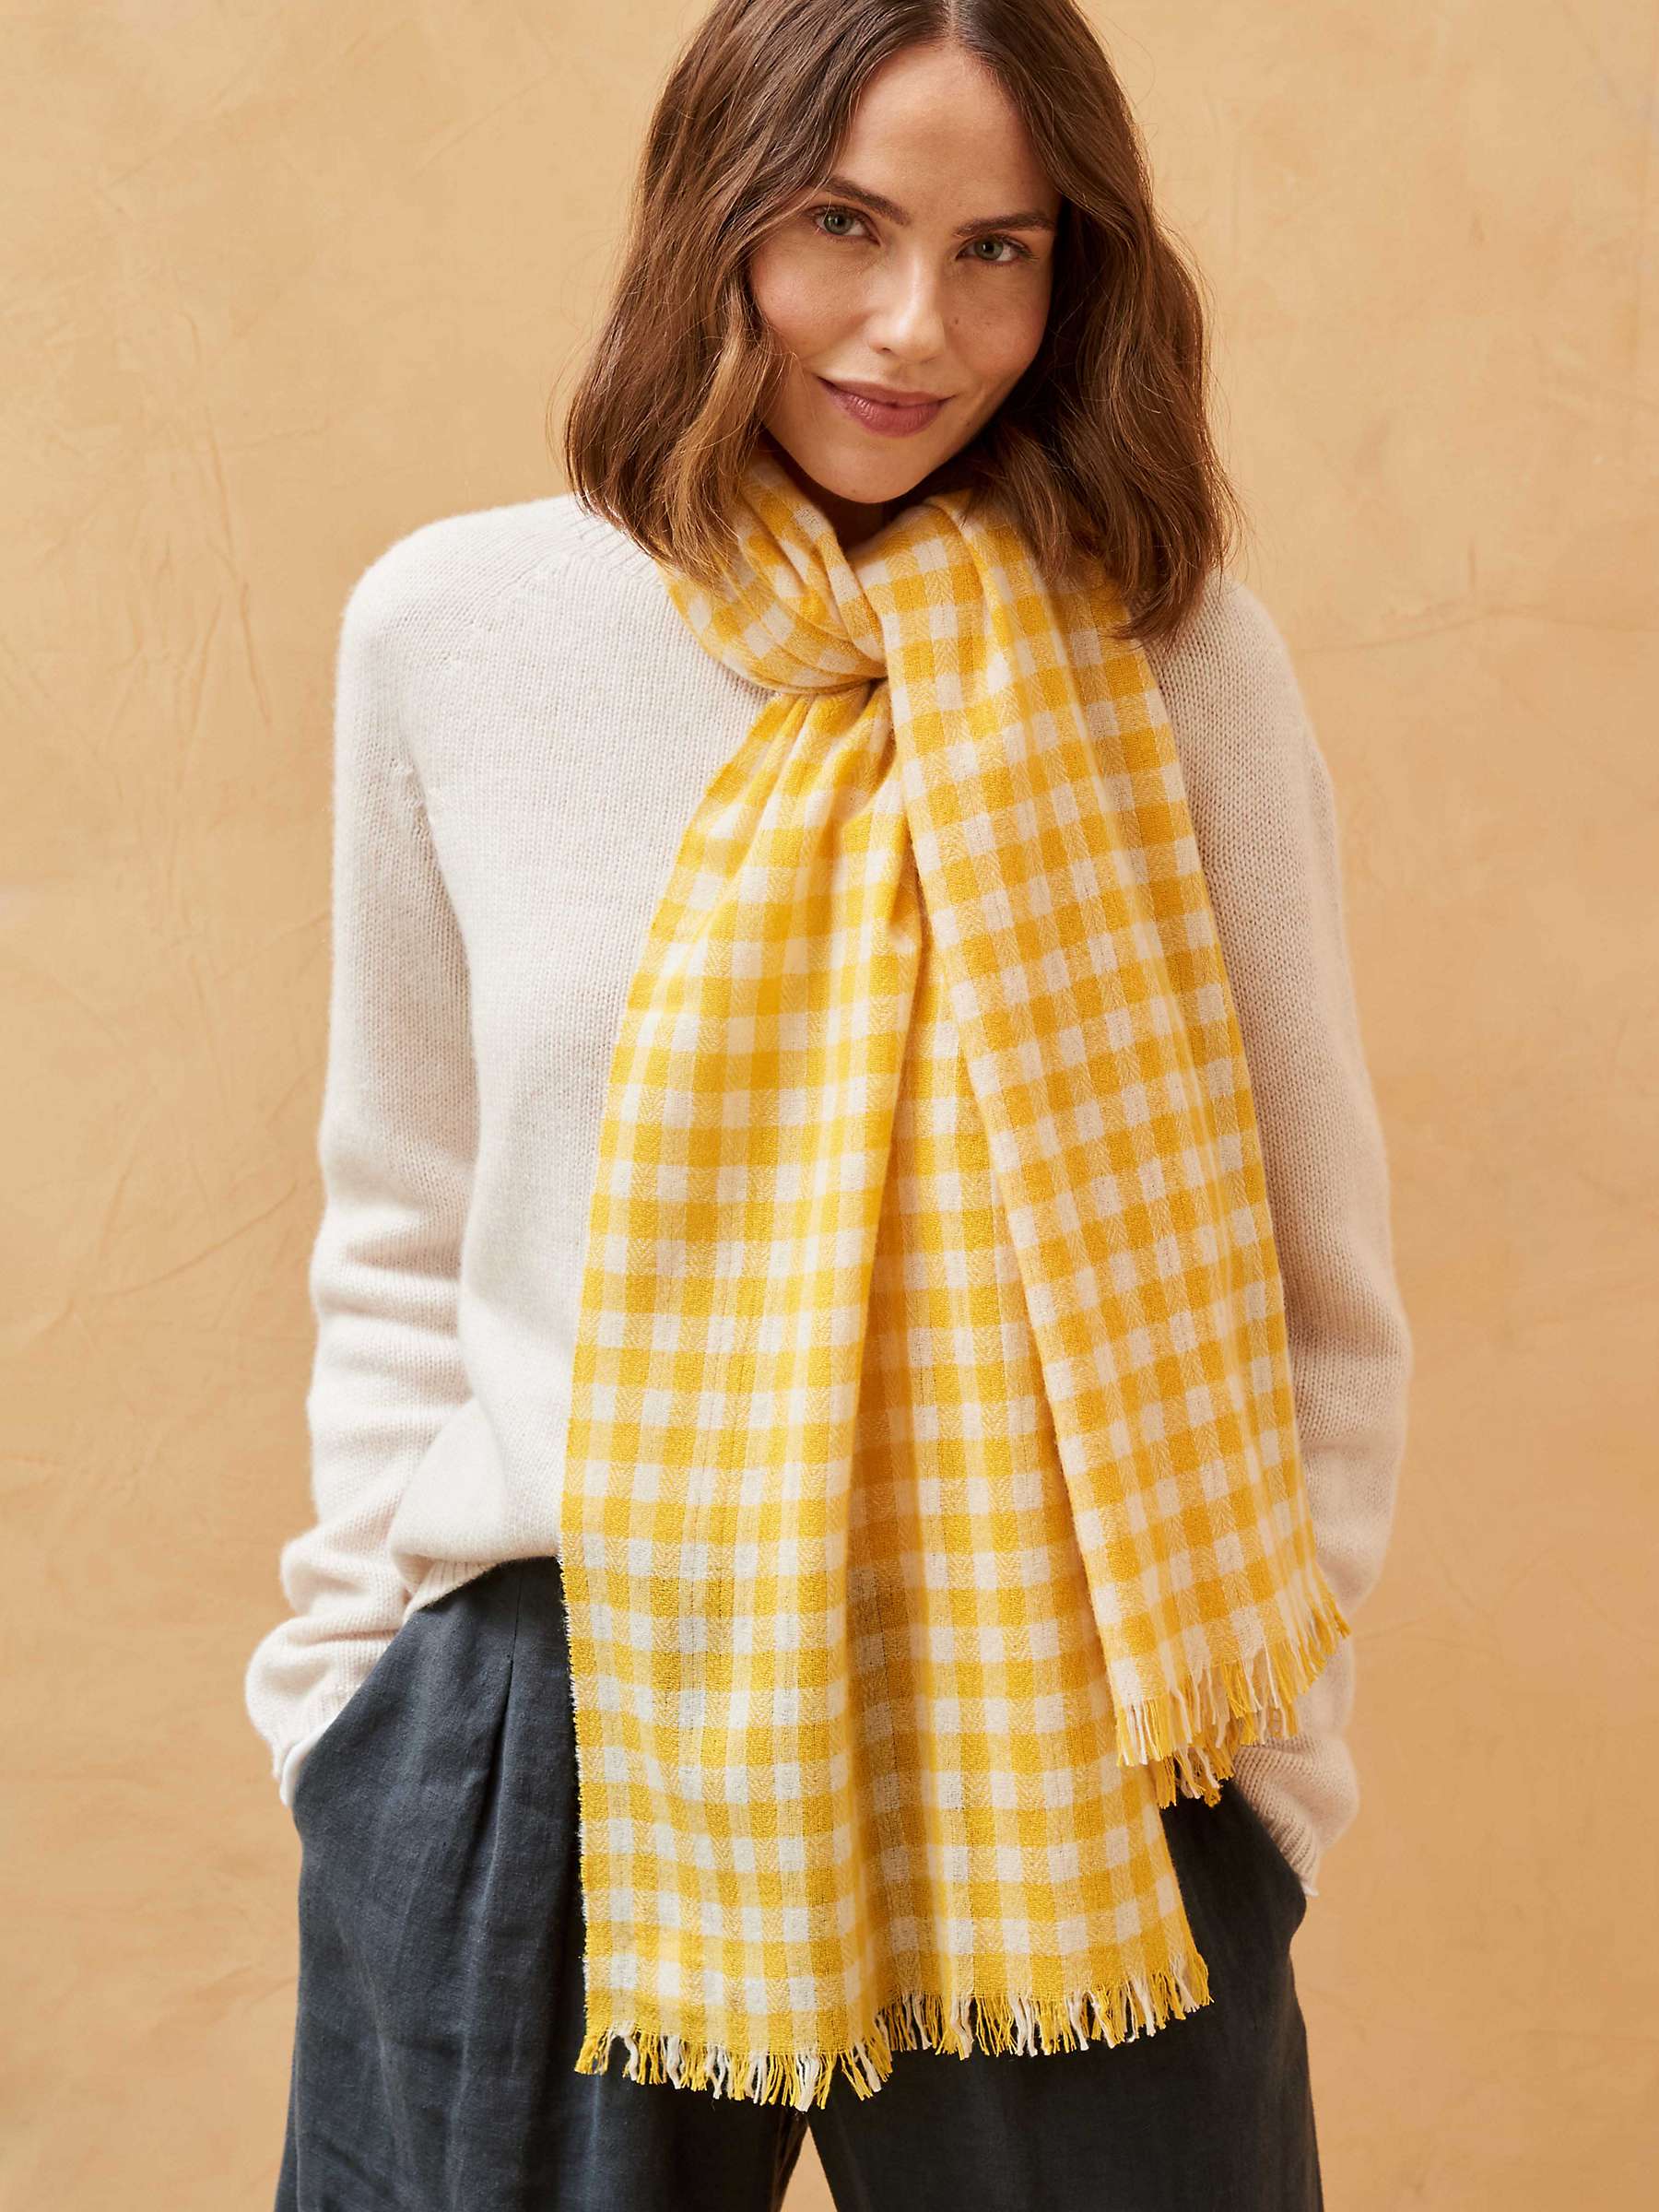 Buy Brora Gingham Cashmere Scarf, Daffodil/Cream Online at johnlewis.com